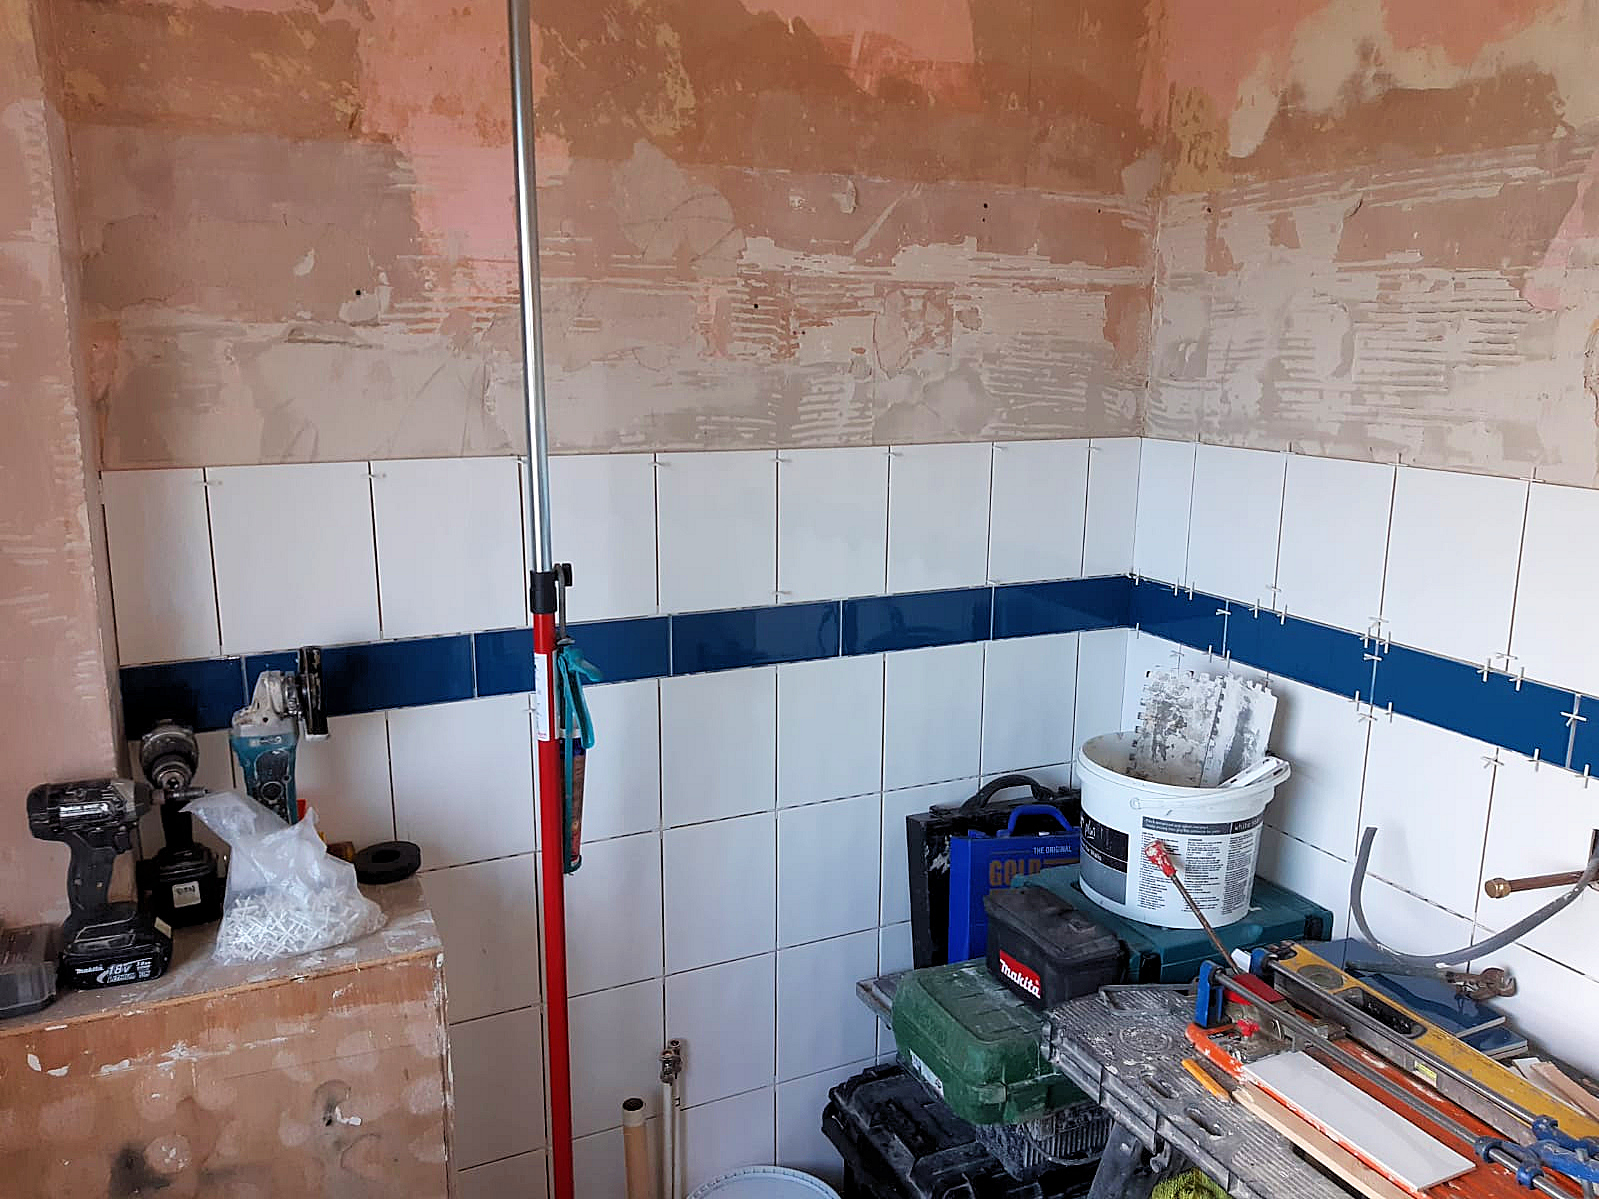 Full height white tiling with a row of vision enhancing contrasting blue tiles at waist height, Barnstaple North Devon